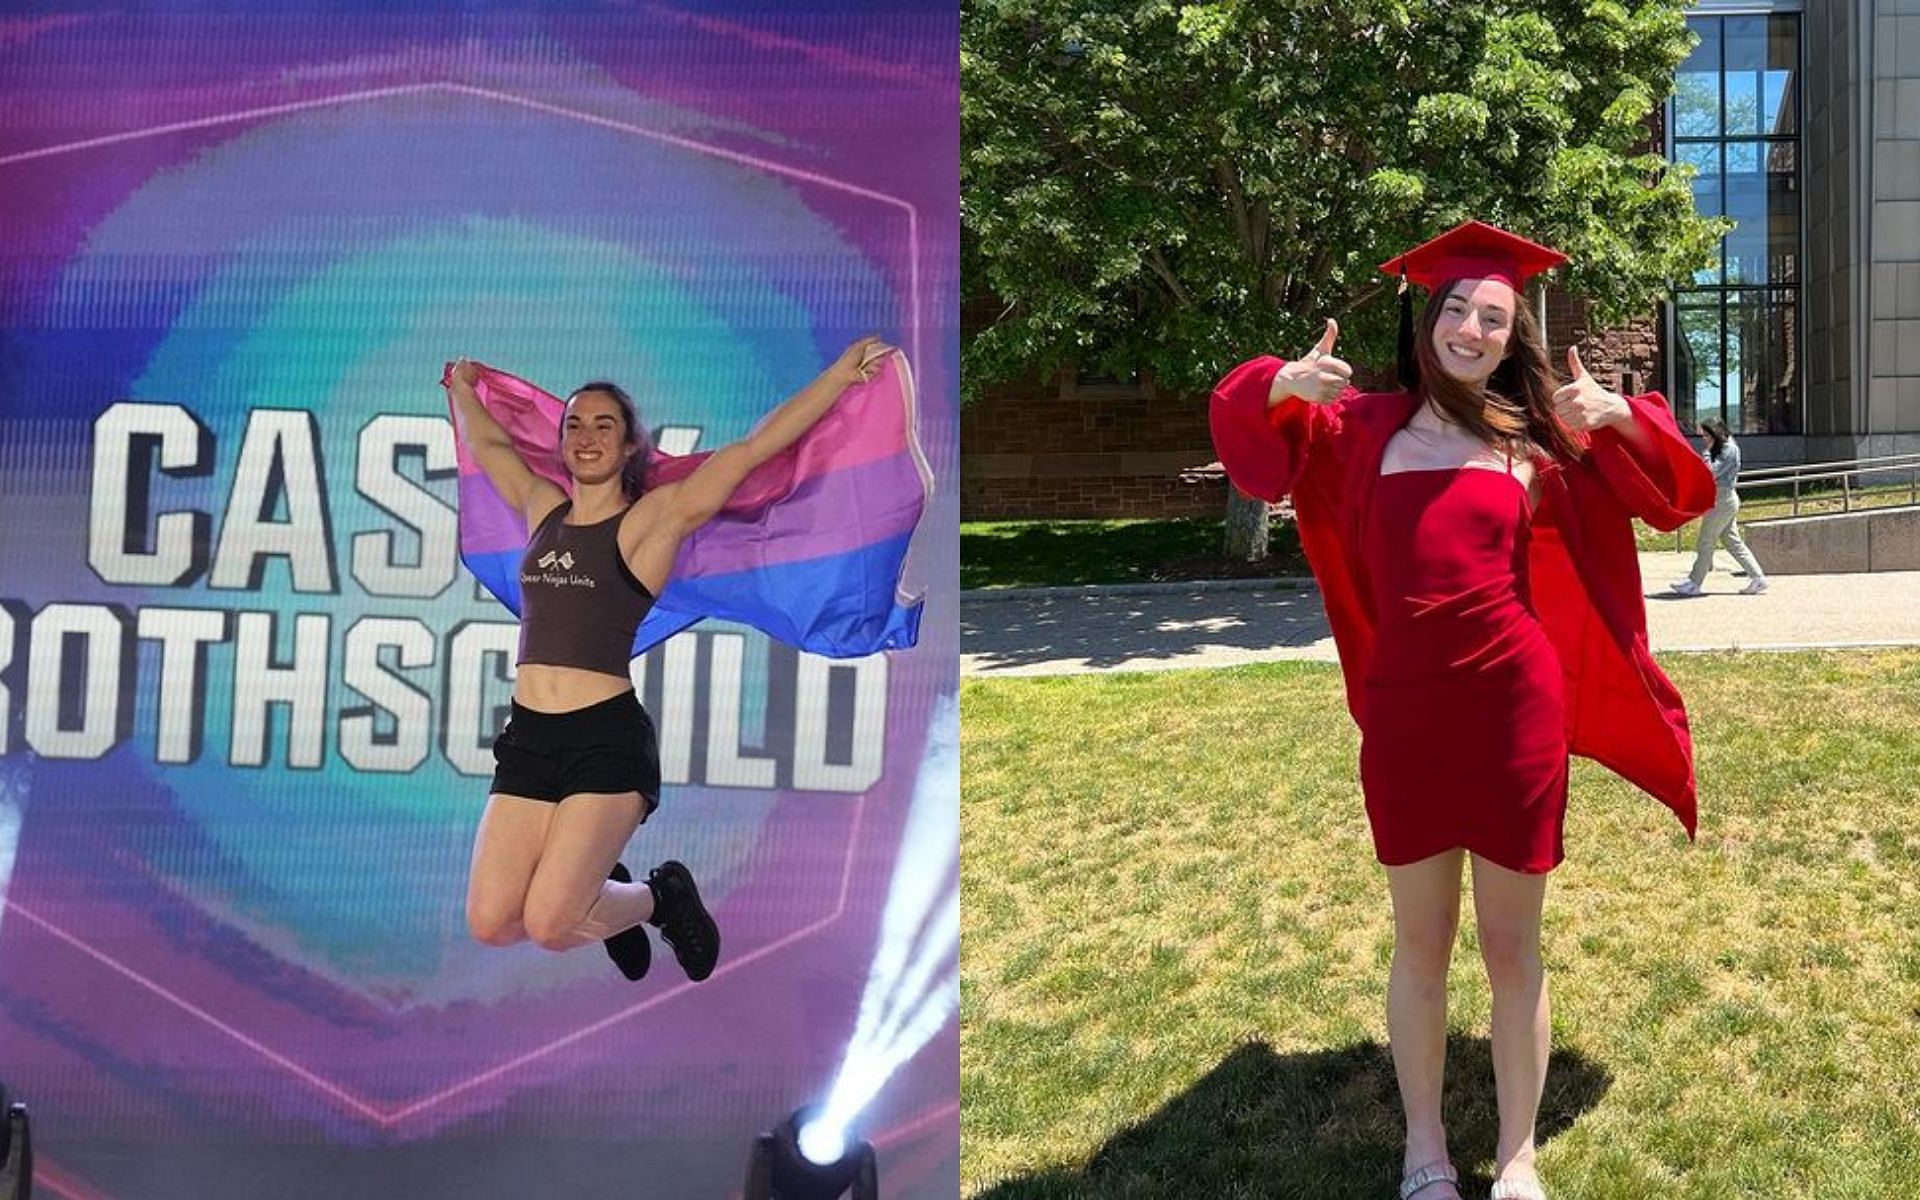 Casey Rothschild becomes the first woman finisher of American Ninja Warrior Season 14(Images via ninjawarrior and caseyrothschild/ Instagram)